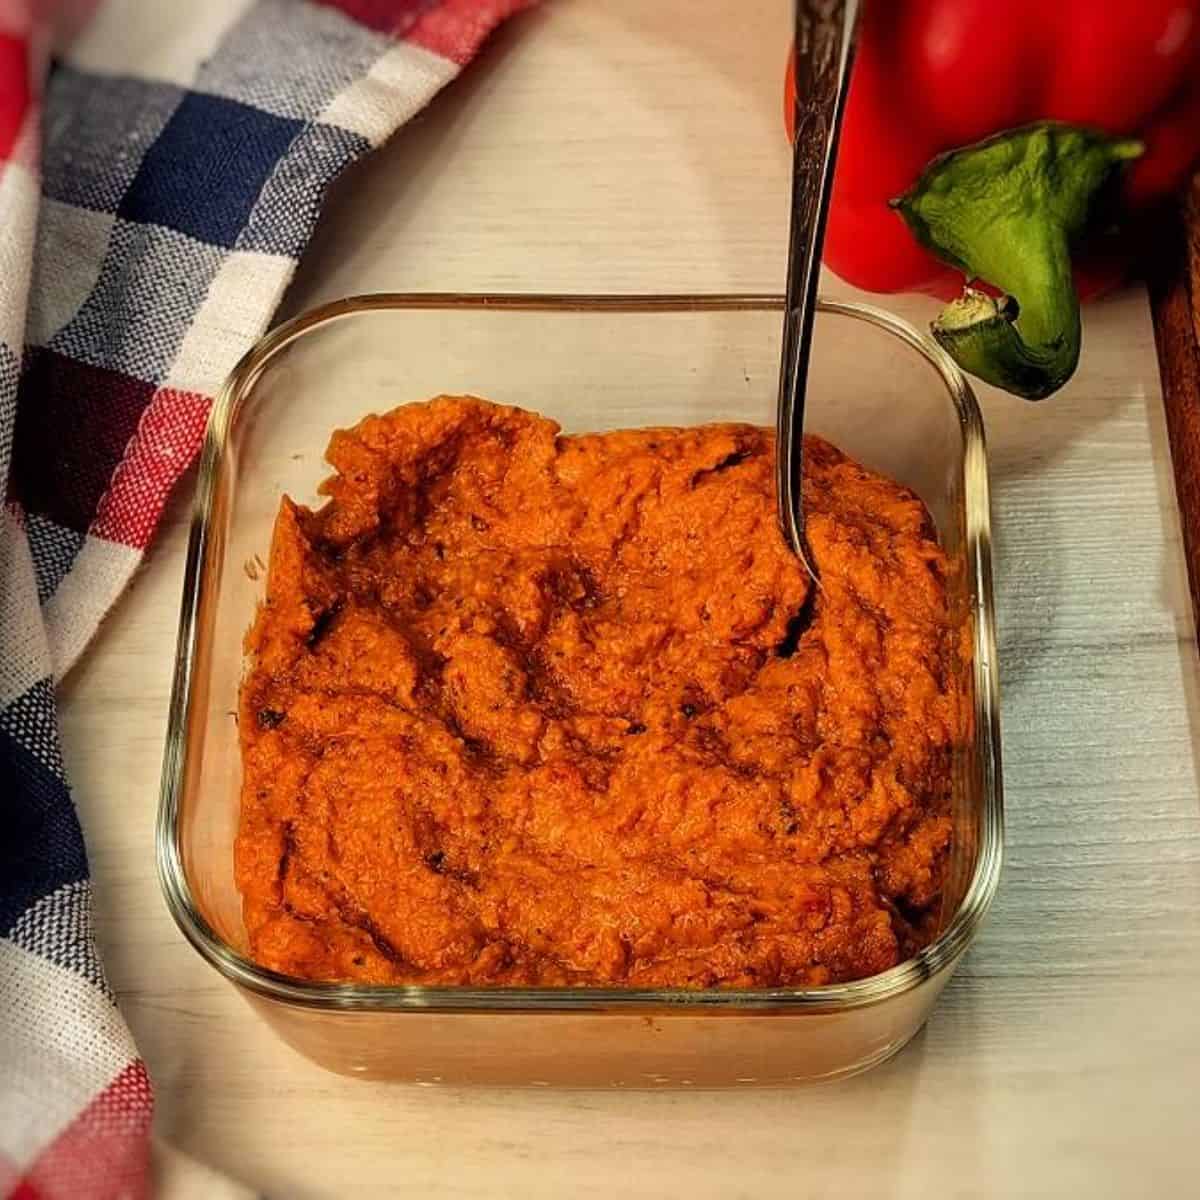 romesco sauce in a glass container